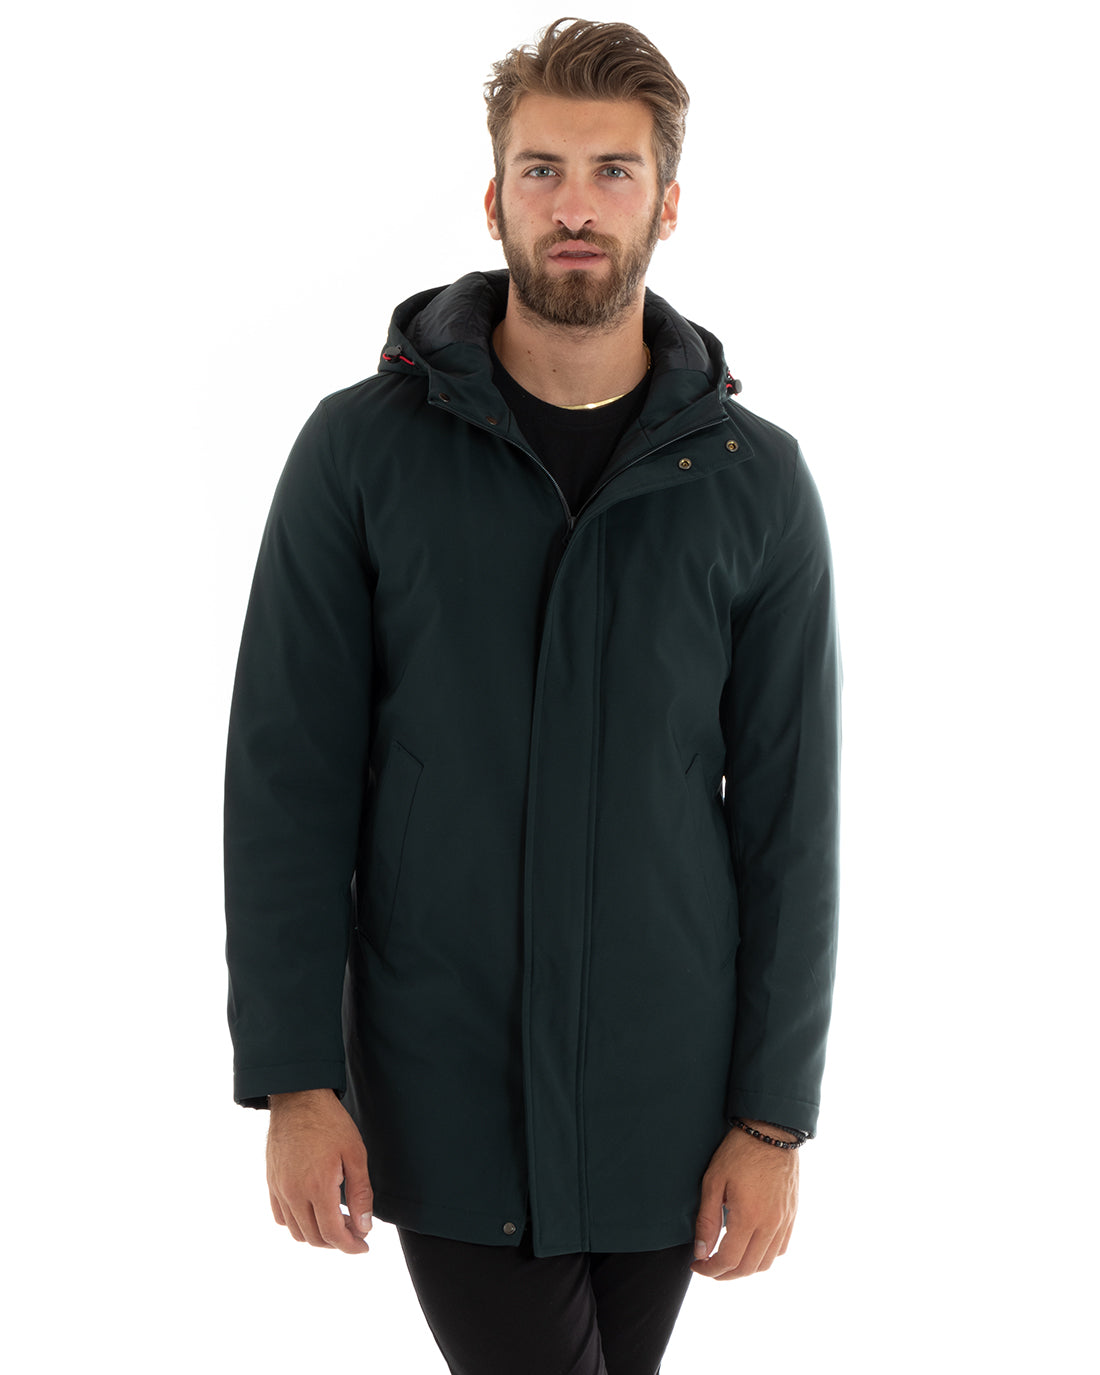 Men's Waterproof Trench Jacket Technical Fabric Long Padded Jacket With Hood Zipper Petrol GIOSAL-G3092A